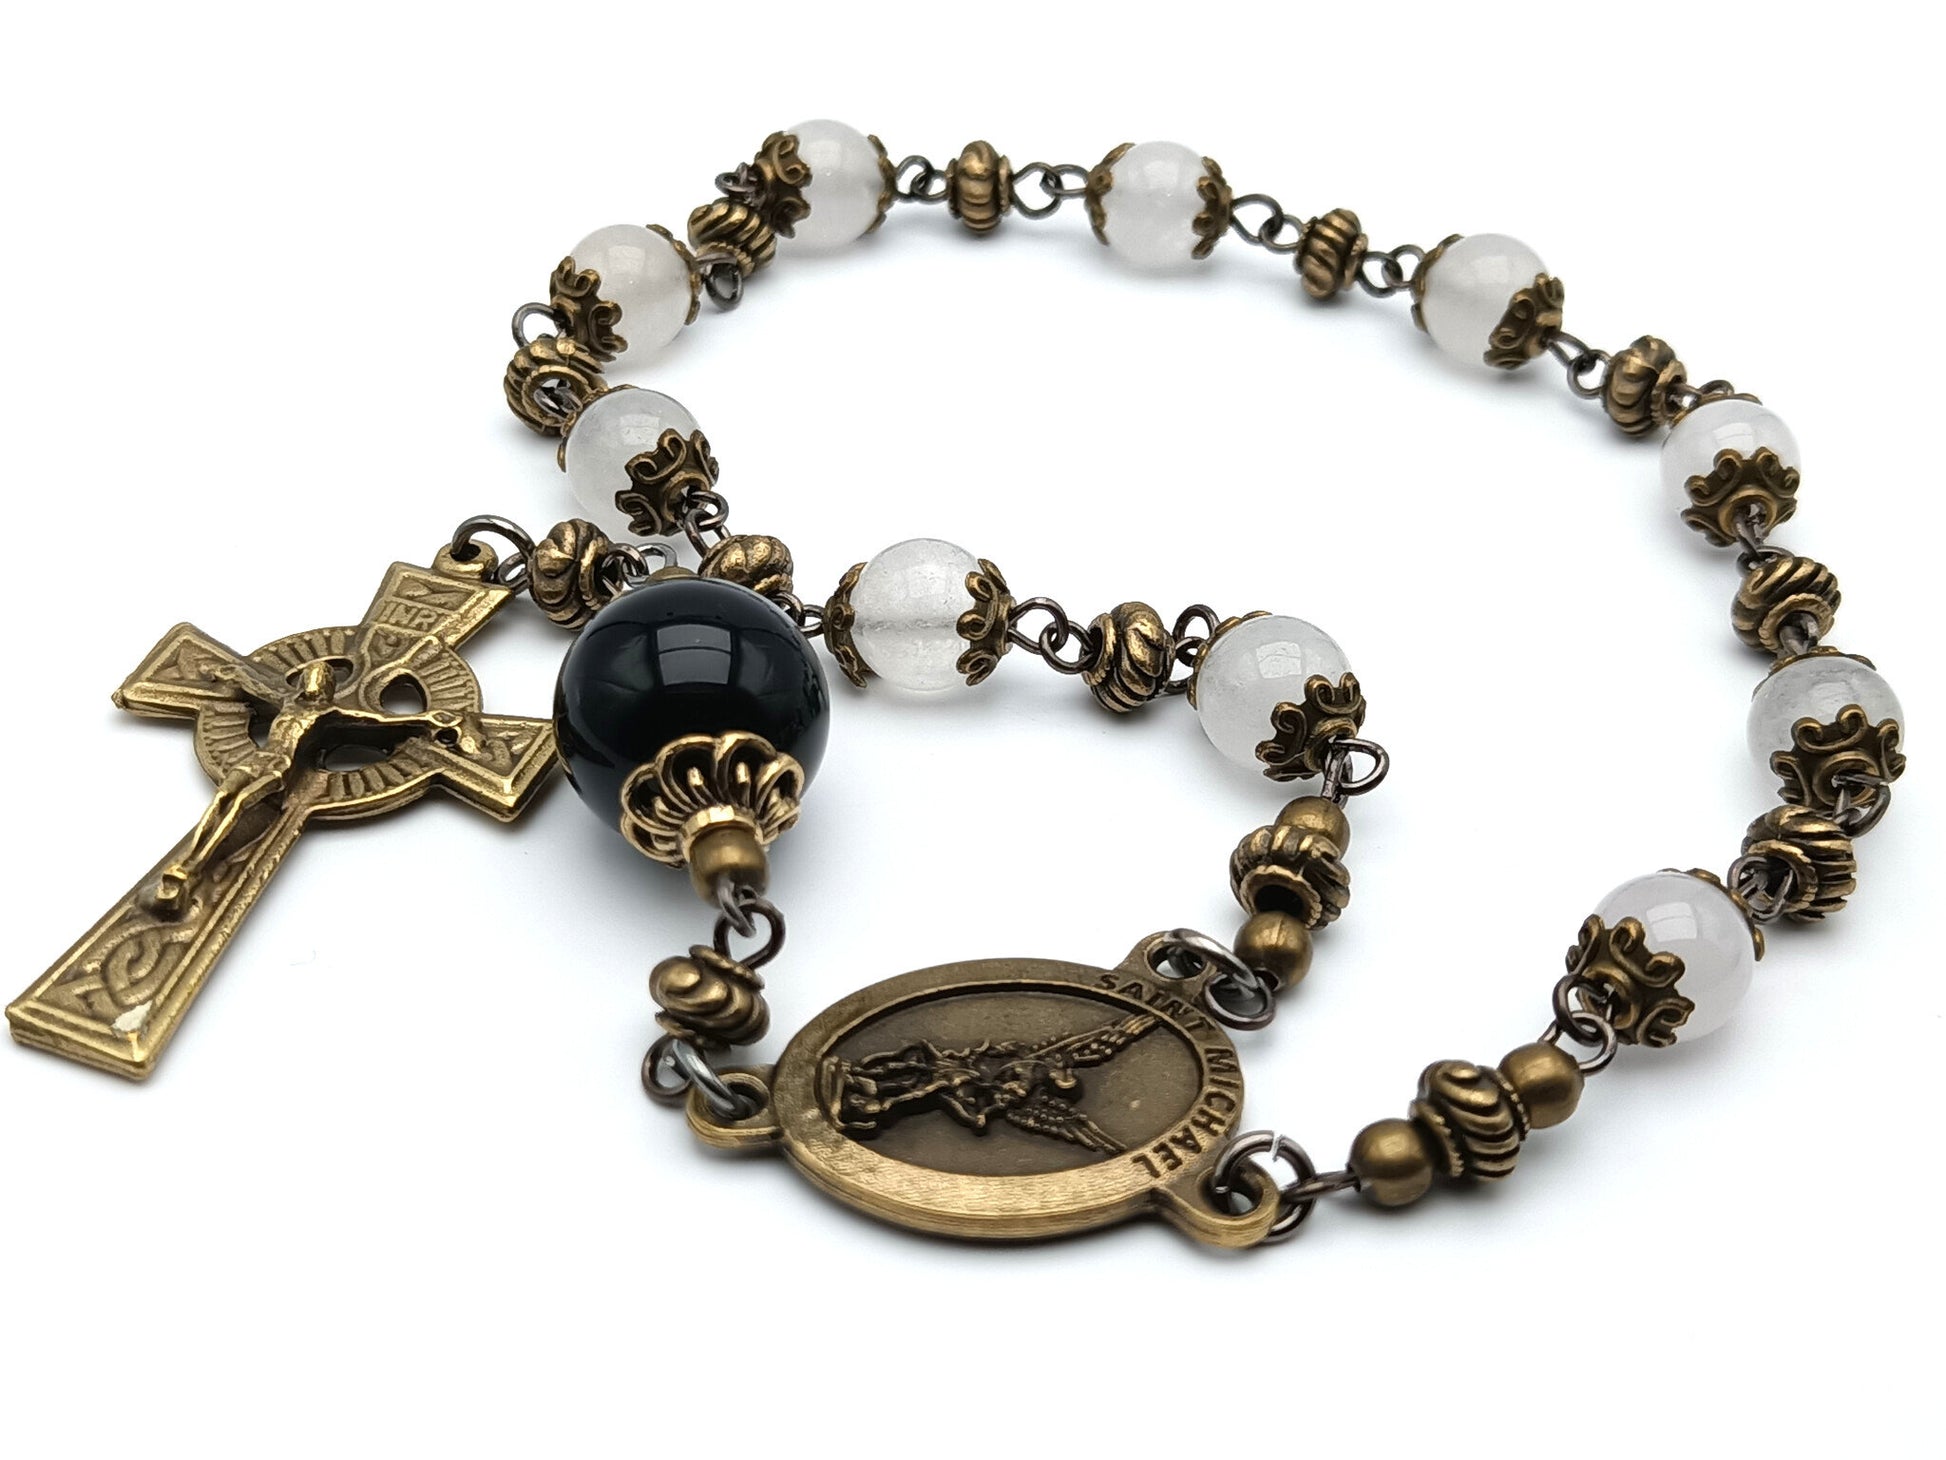 Saint Michael unique rosary beads single decade with opal gemstone beads, bronze crucifix, centre medal and onyx pater bead.